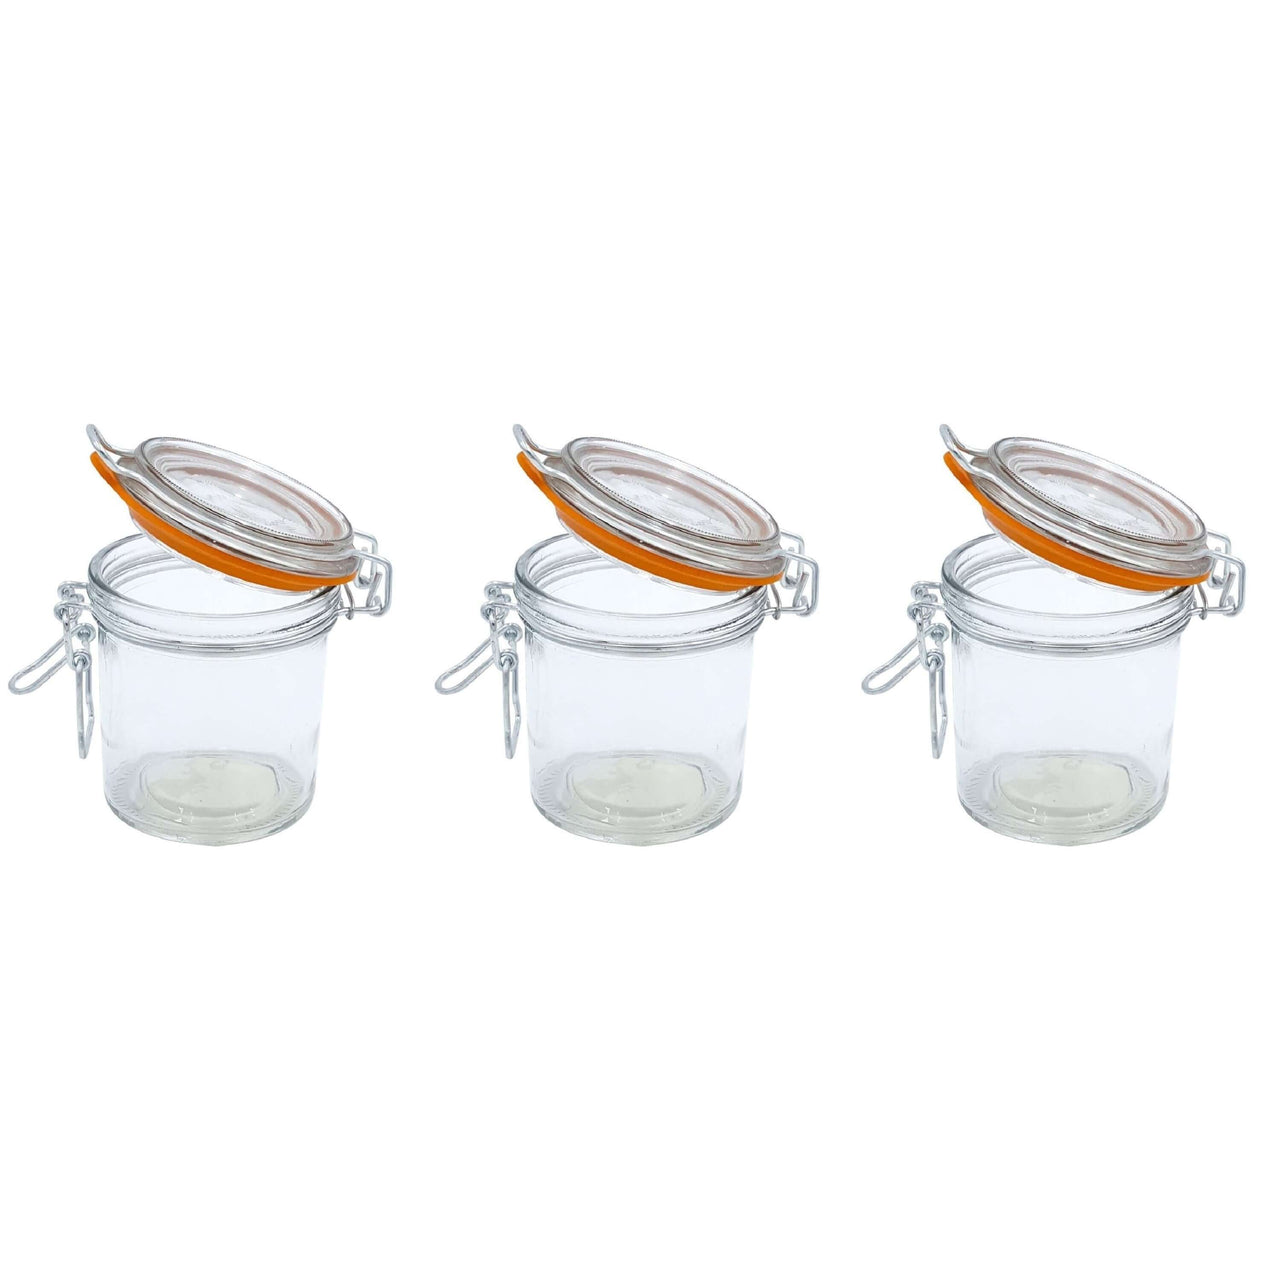 9 oz. Mini Hermes Jars with Air-Tight Clamp Top Lid, Set of 3